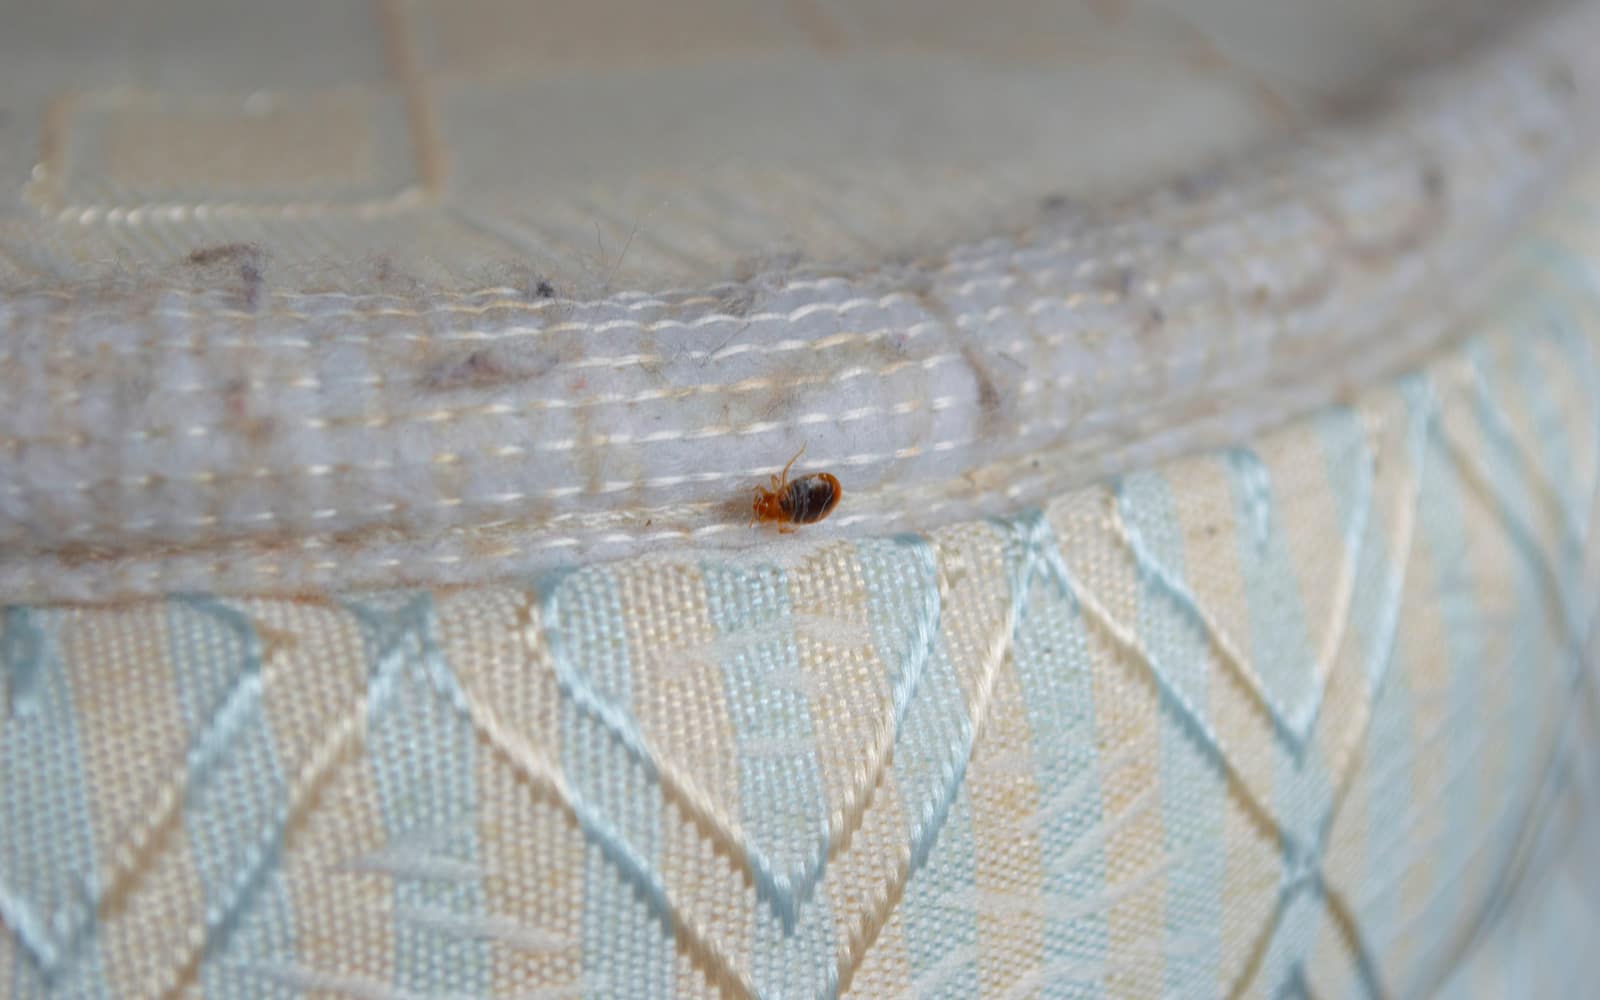 Where Do Bed Bugs Hide In A Mattress?